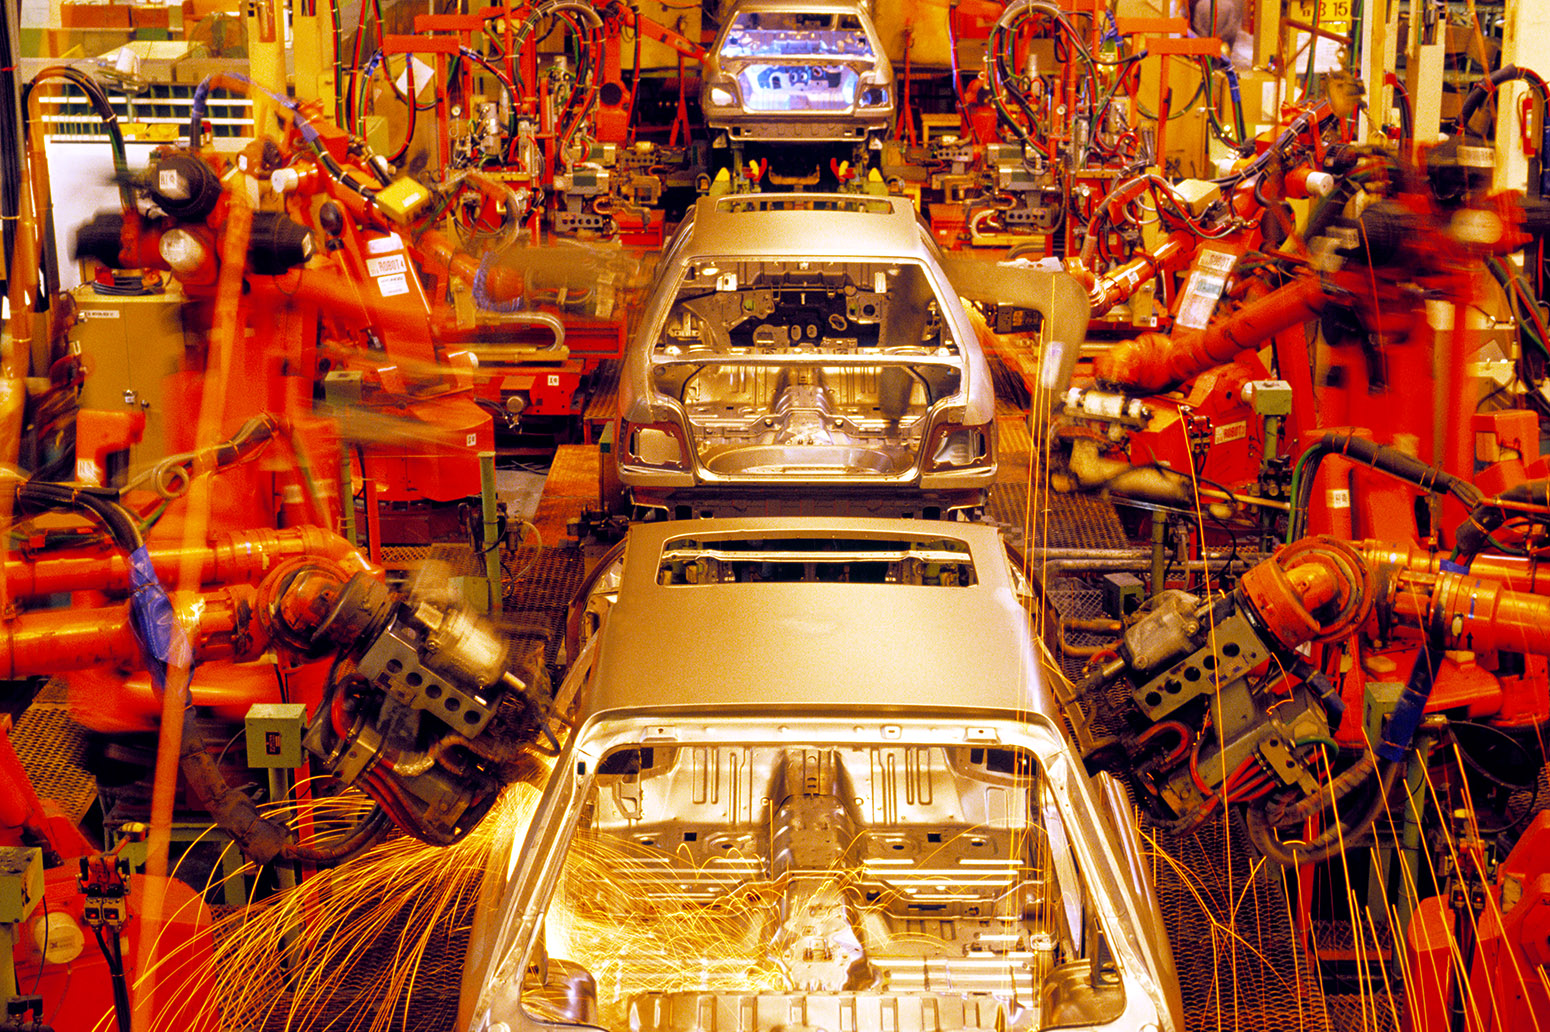 Assembly line of automobiles. Credit: Pat Behnke / Alamy Stock Photo. A9E069